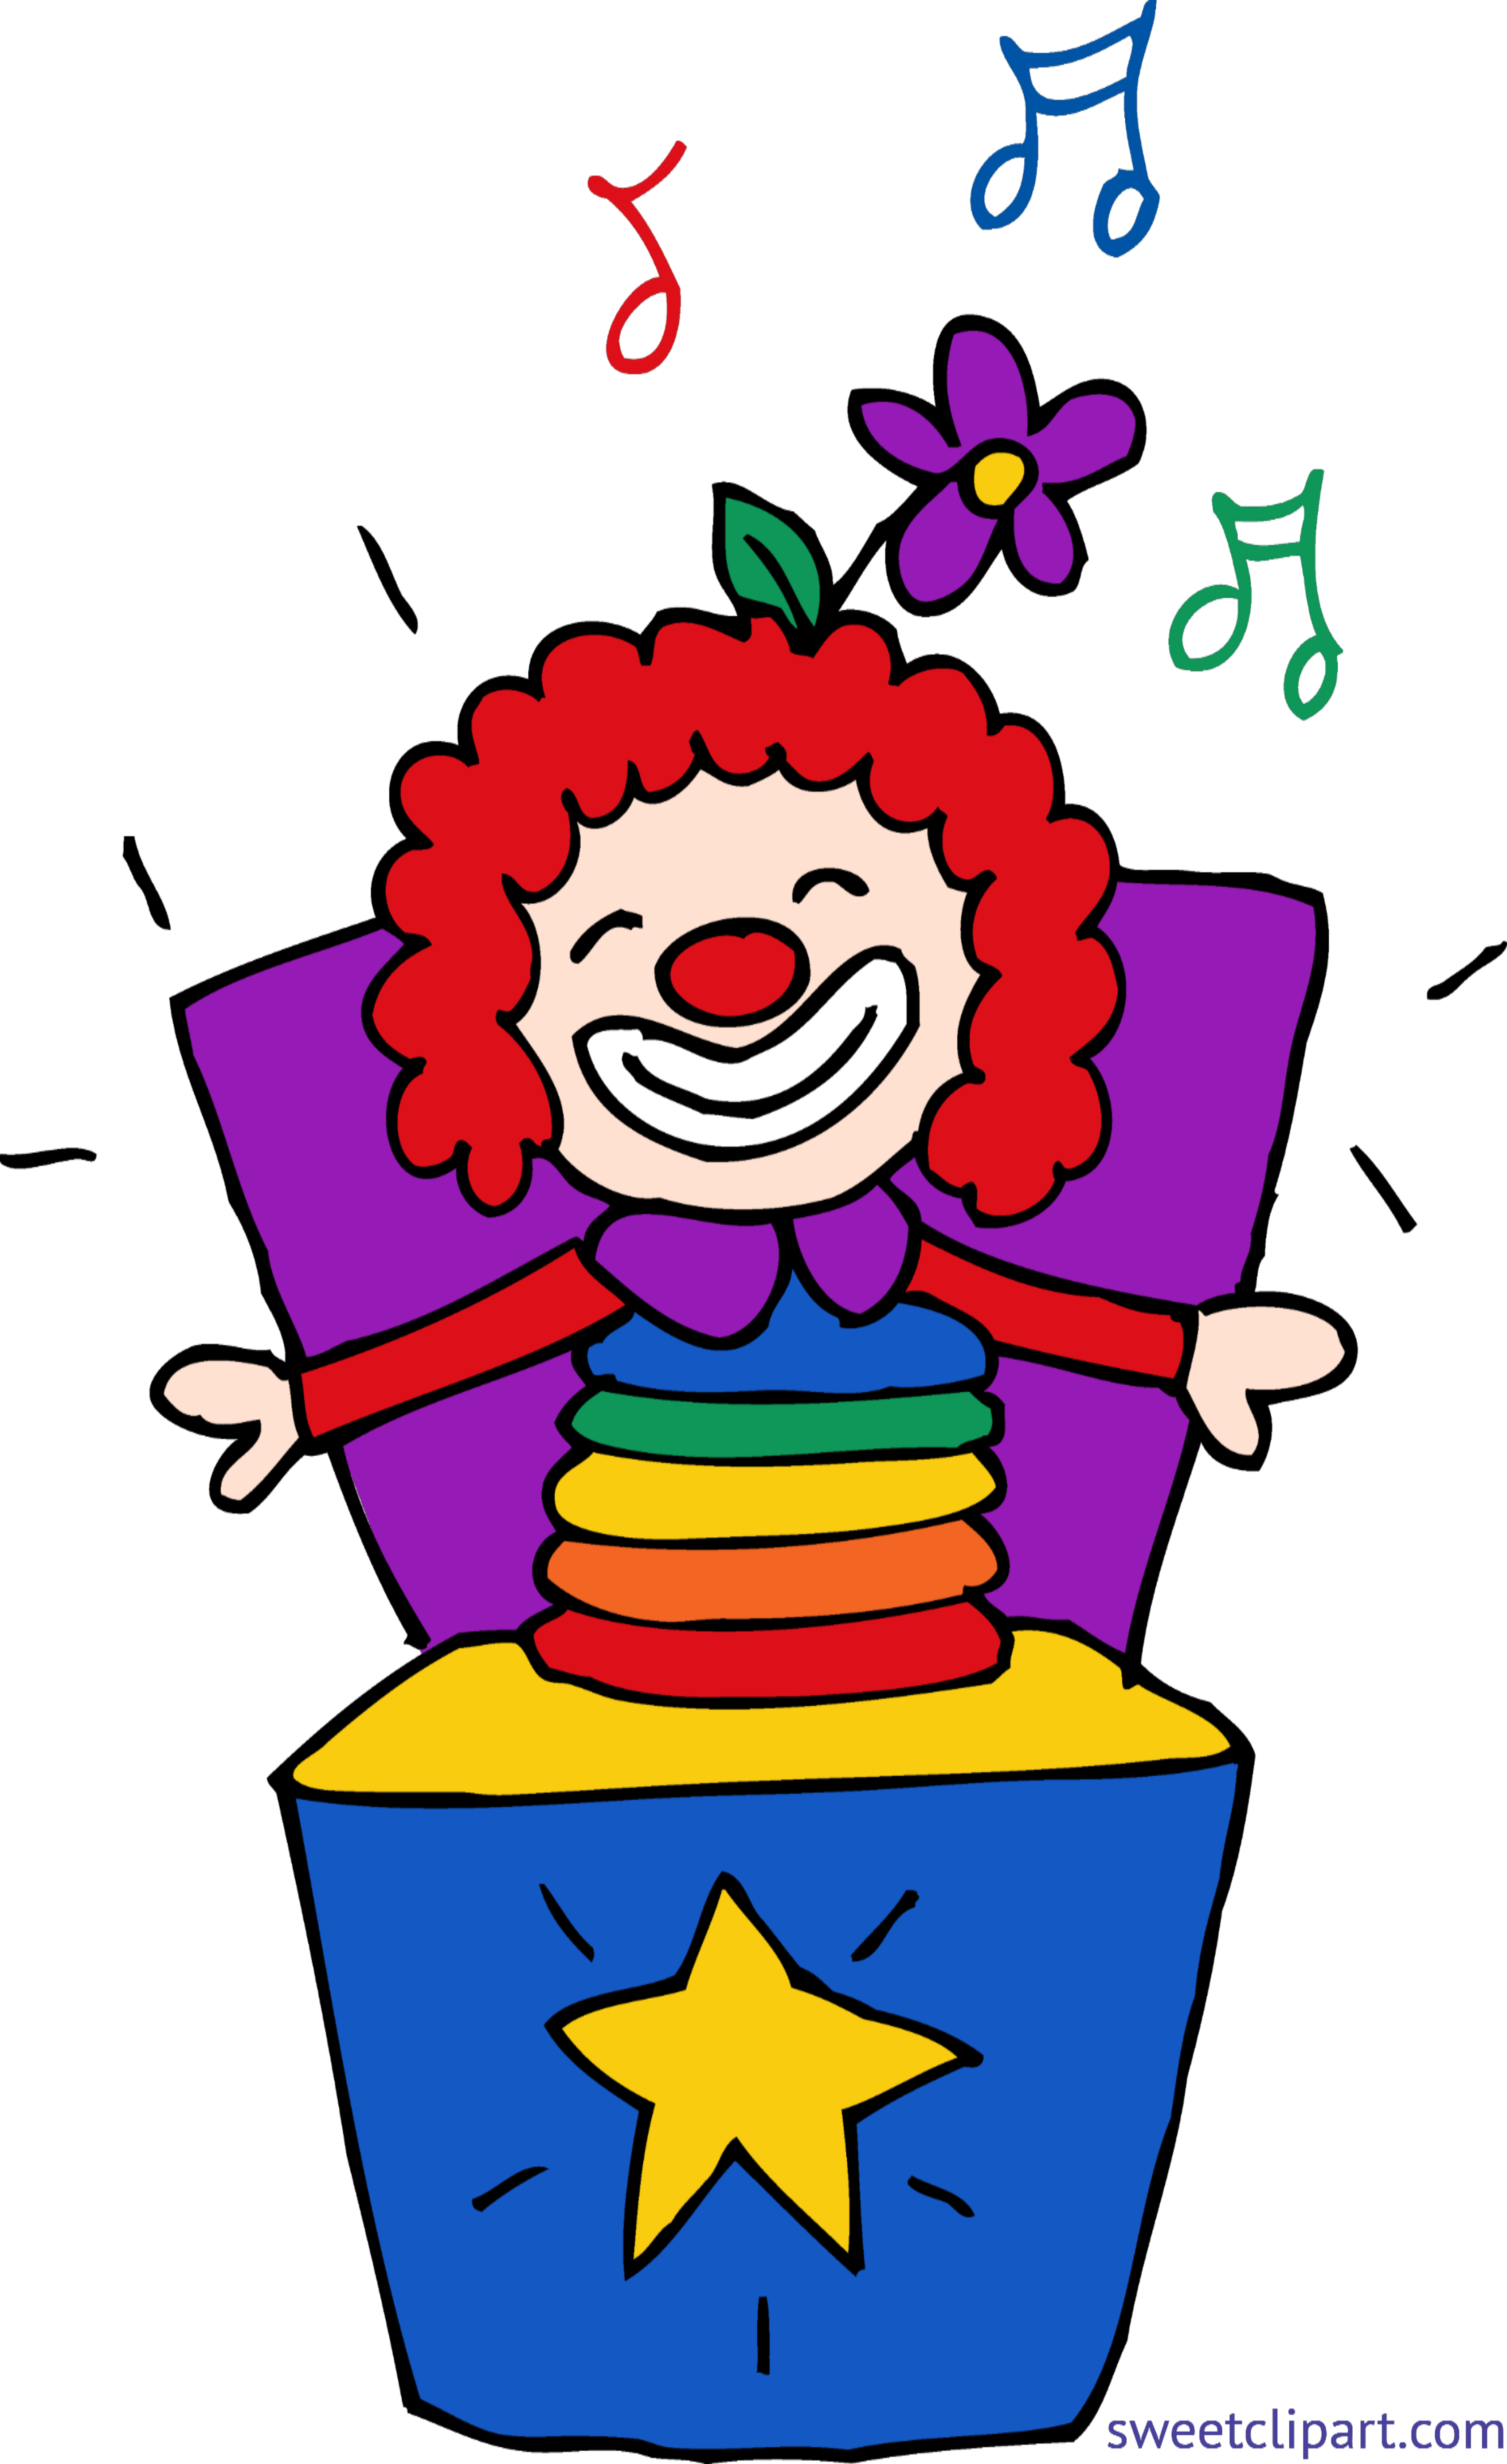 https://sweetclipart.com/wp-content/uploads/Jack-In-The-Box-Clip-Art.png